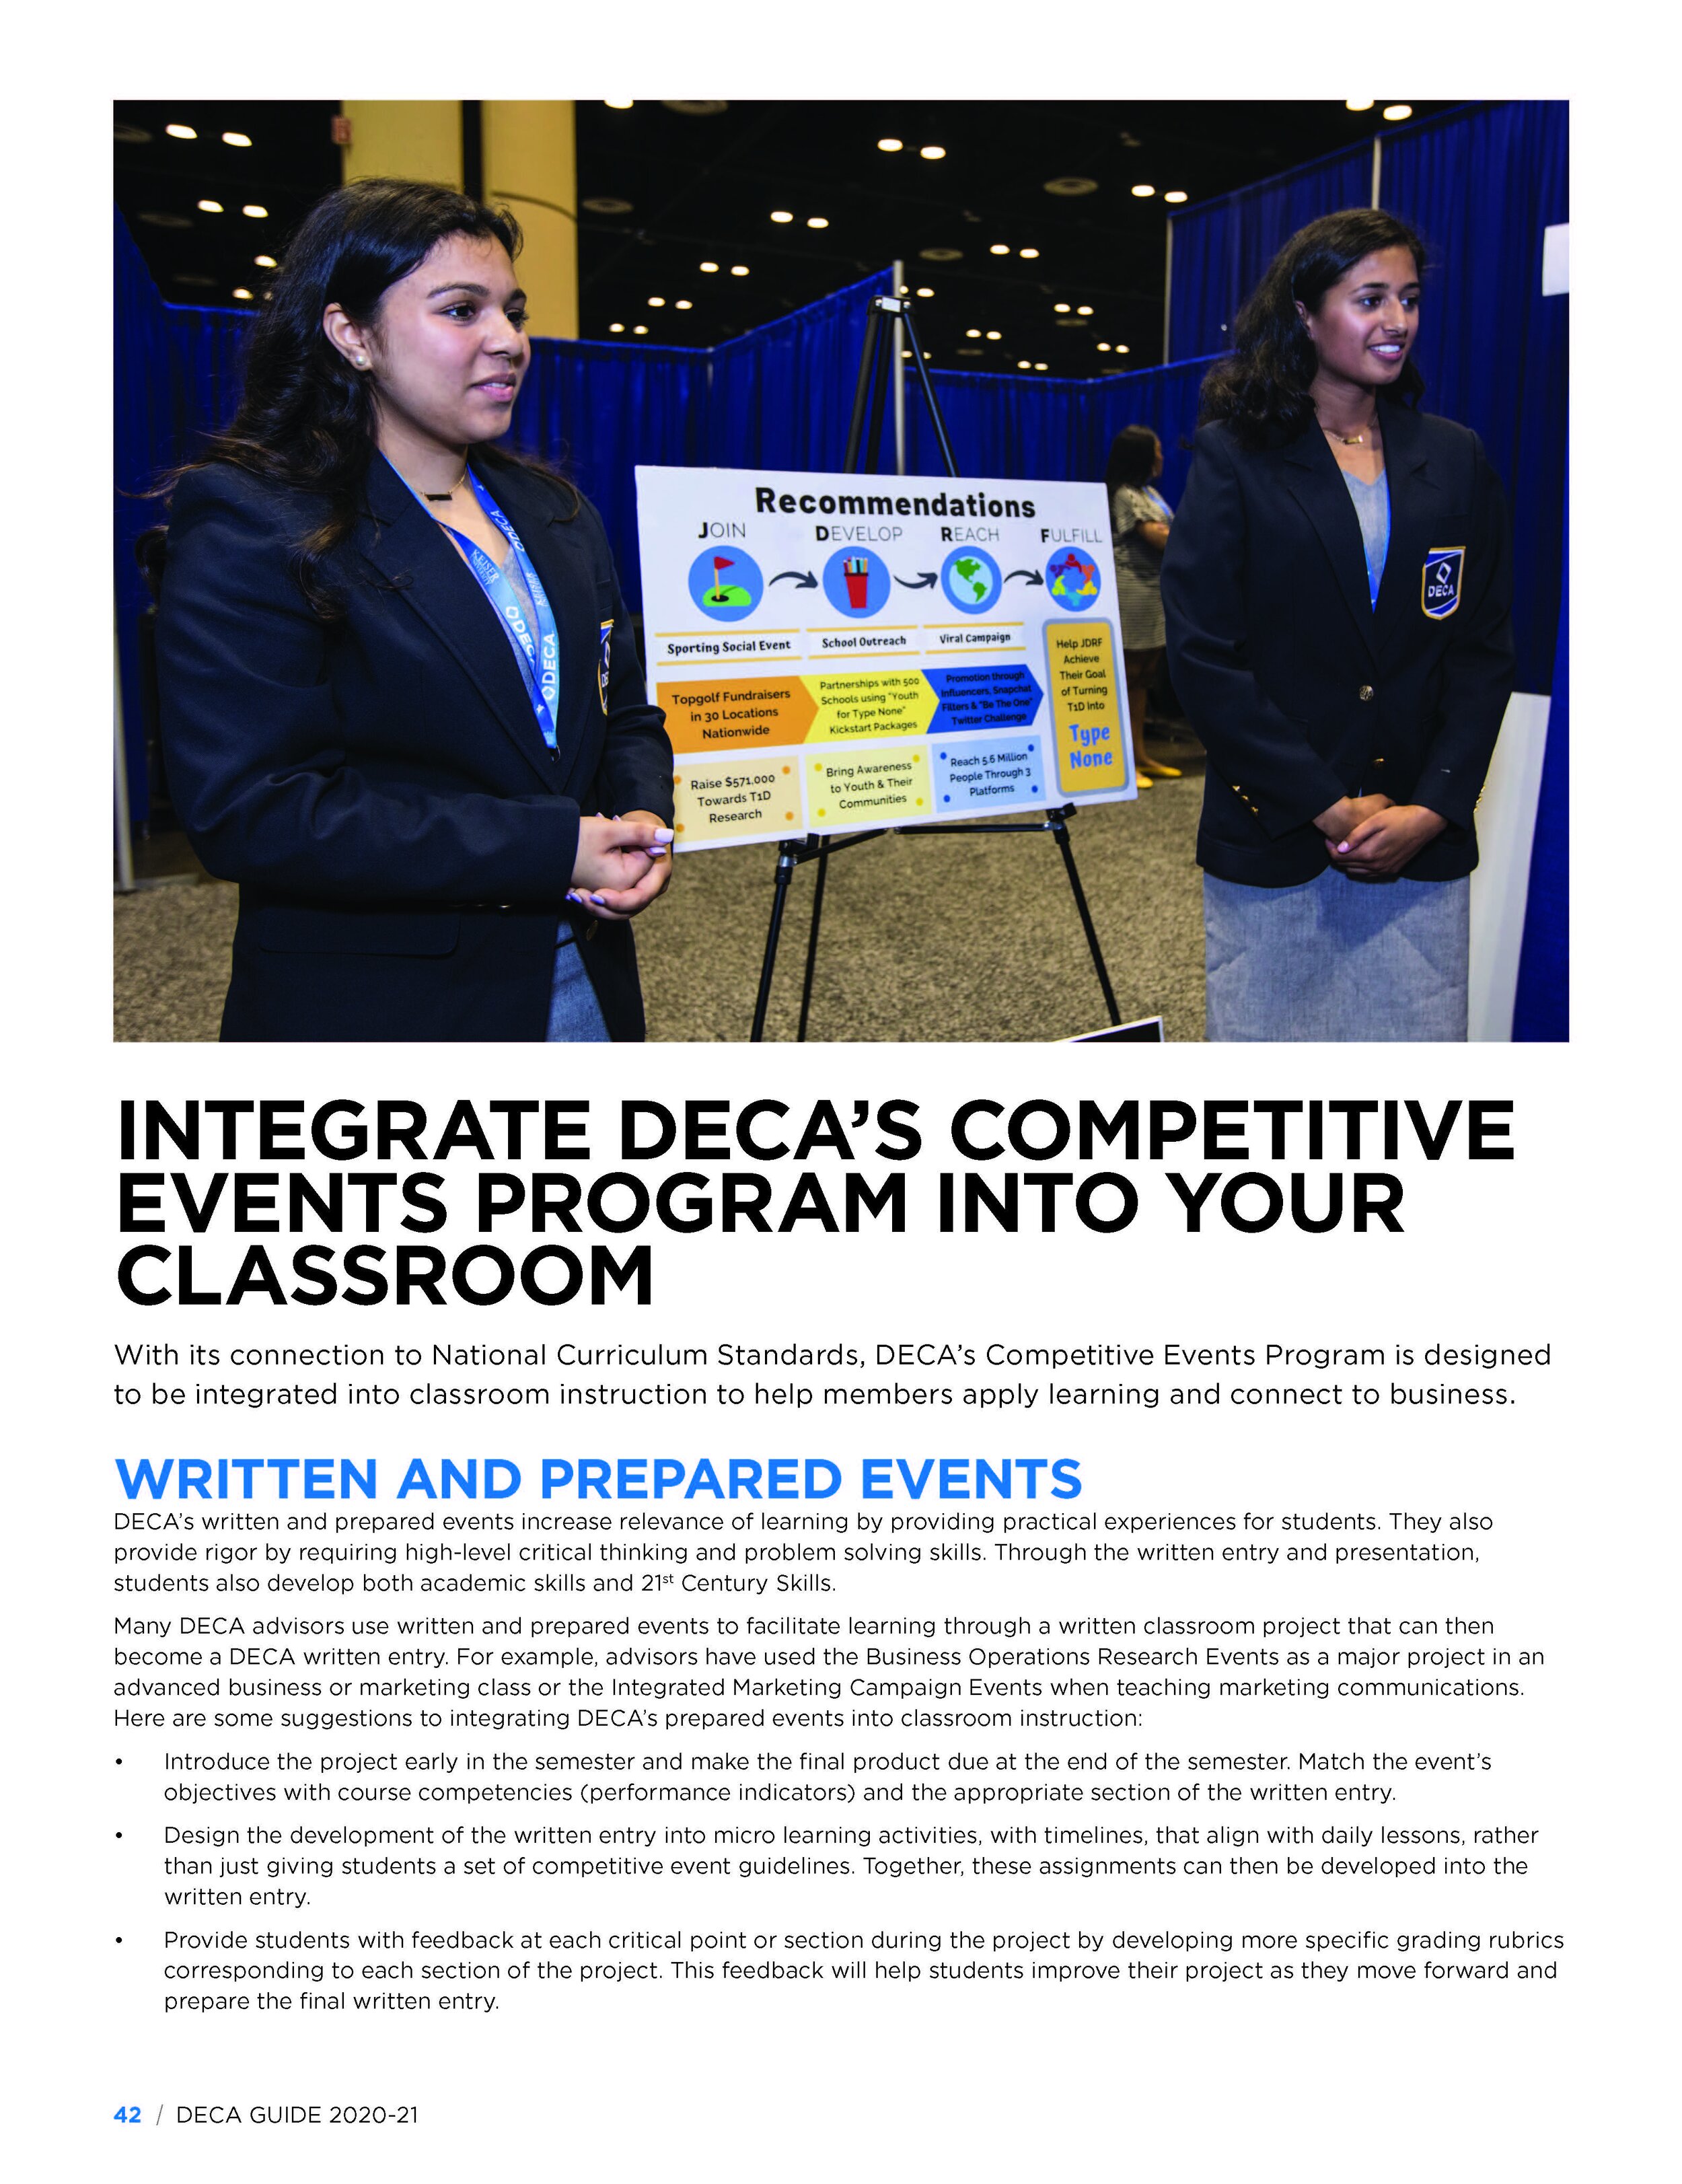 DECA-2020-HS-Guide_Page_044.jpg